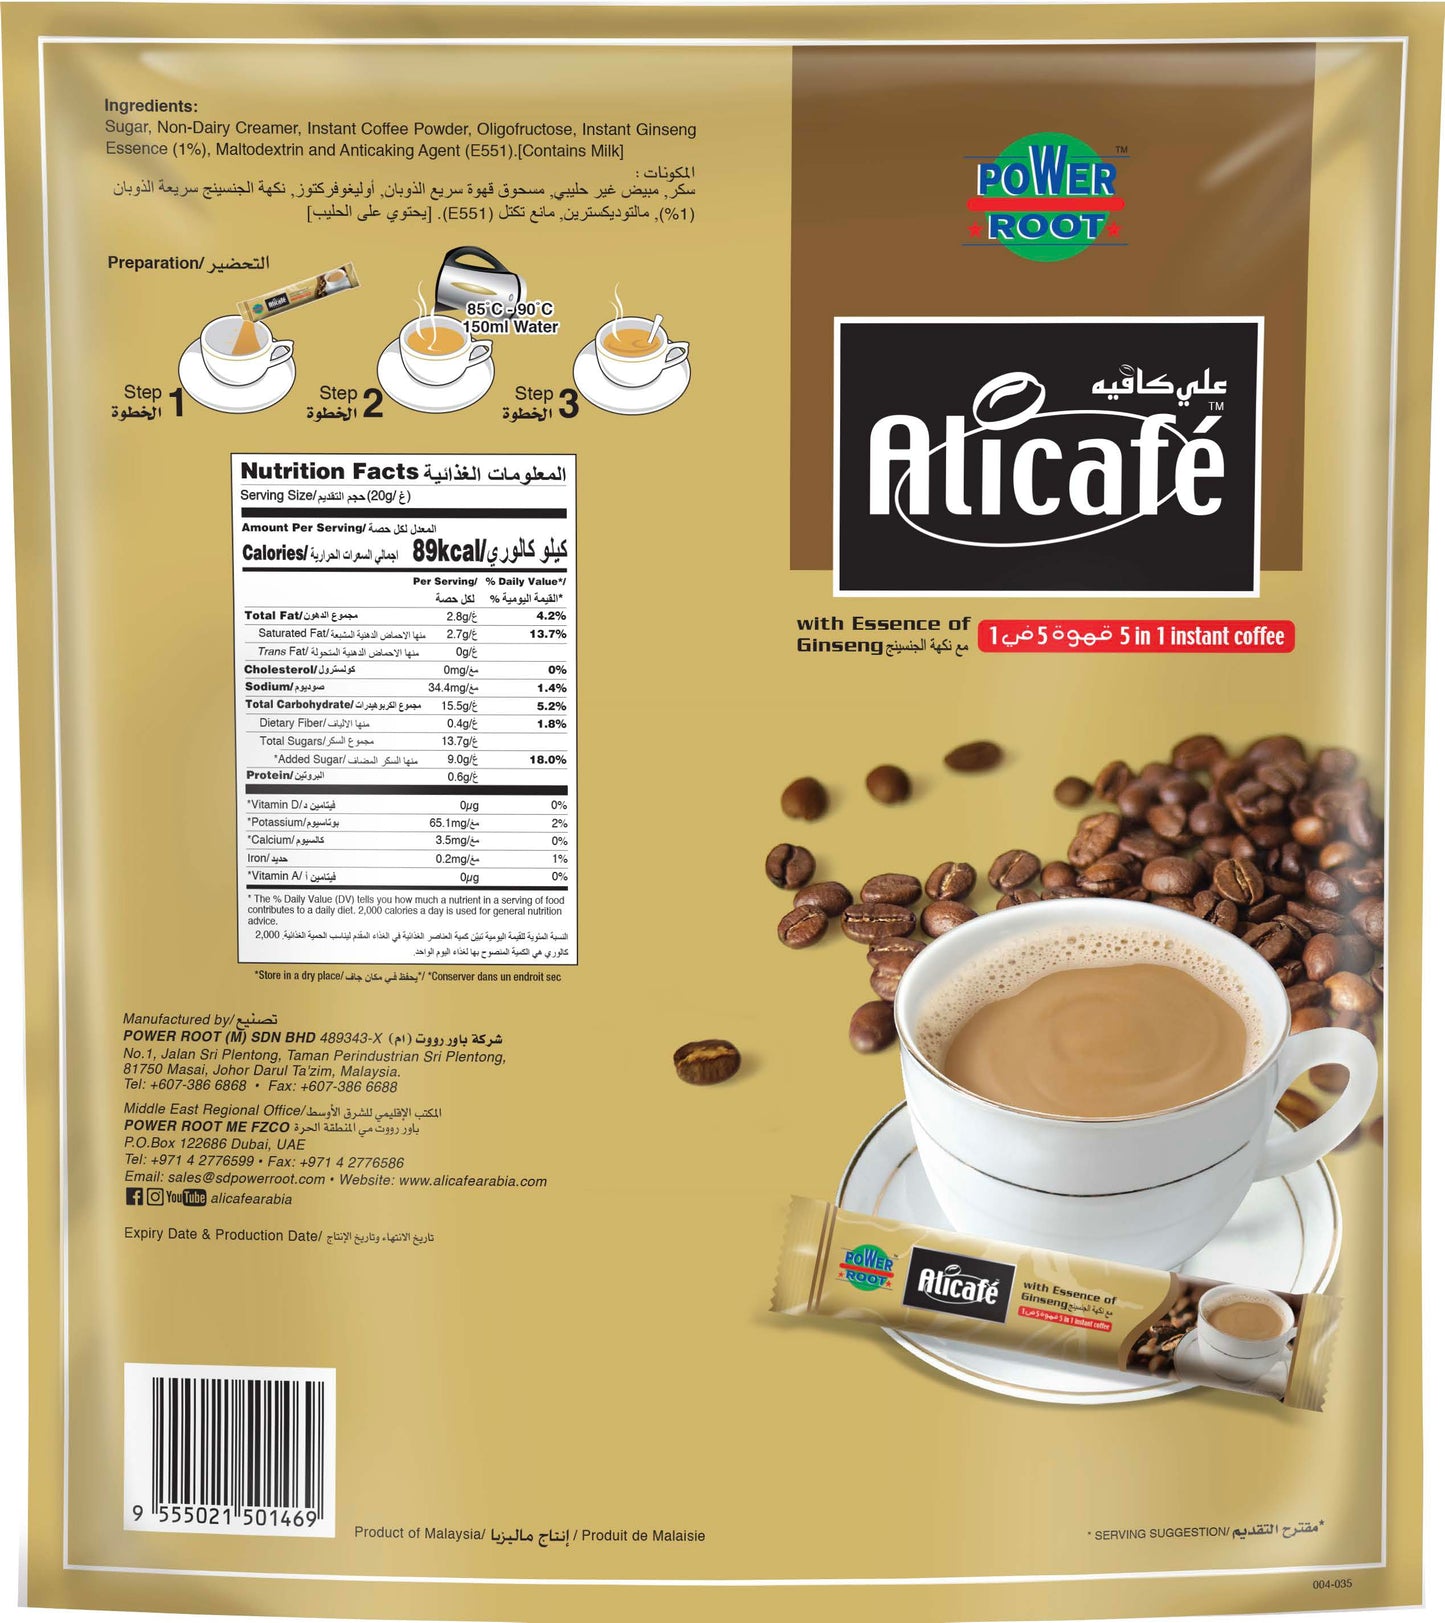 Alicafé 5in1 Essence Of Ginseng Instant Coffee Pouch 20g (20 Sticks)